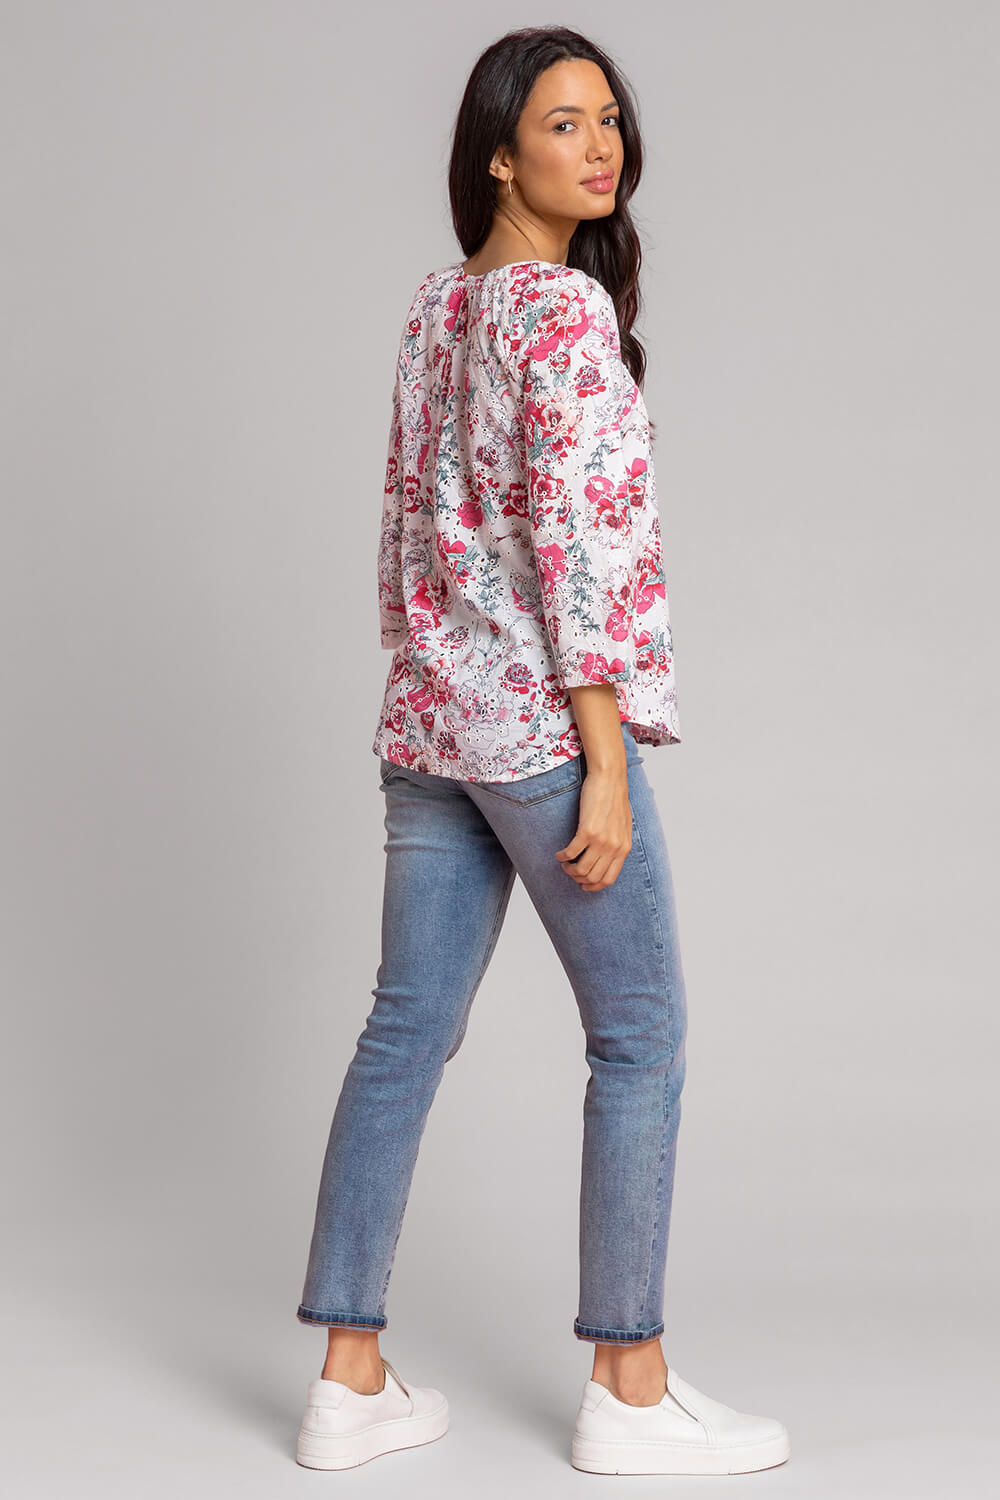 PINK Broderie Floral Print Button Top, Image 2 of 4